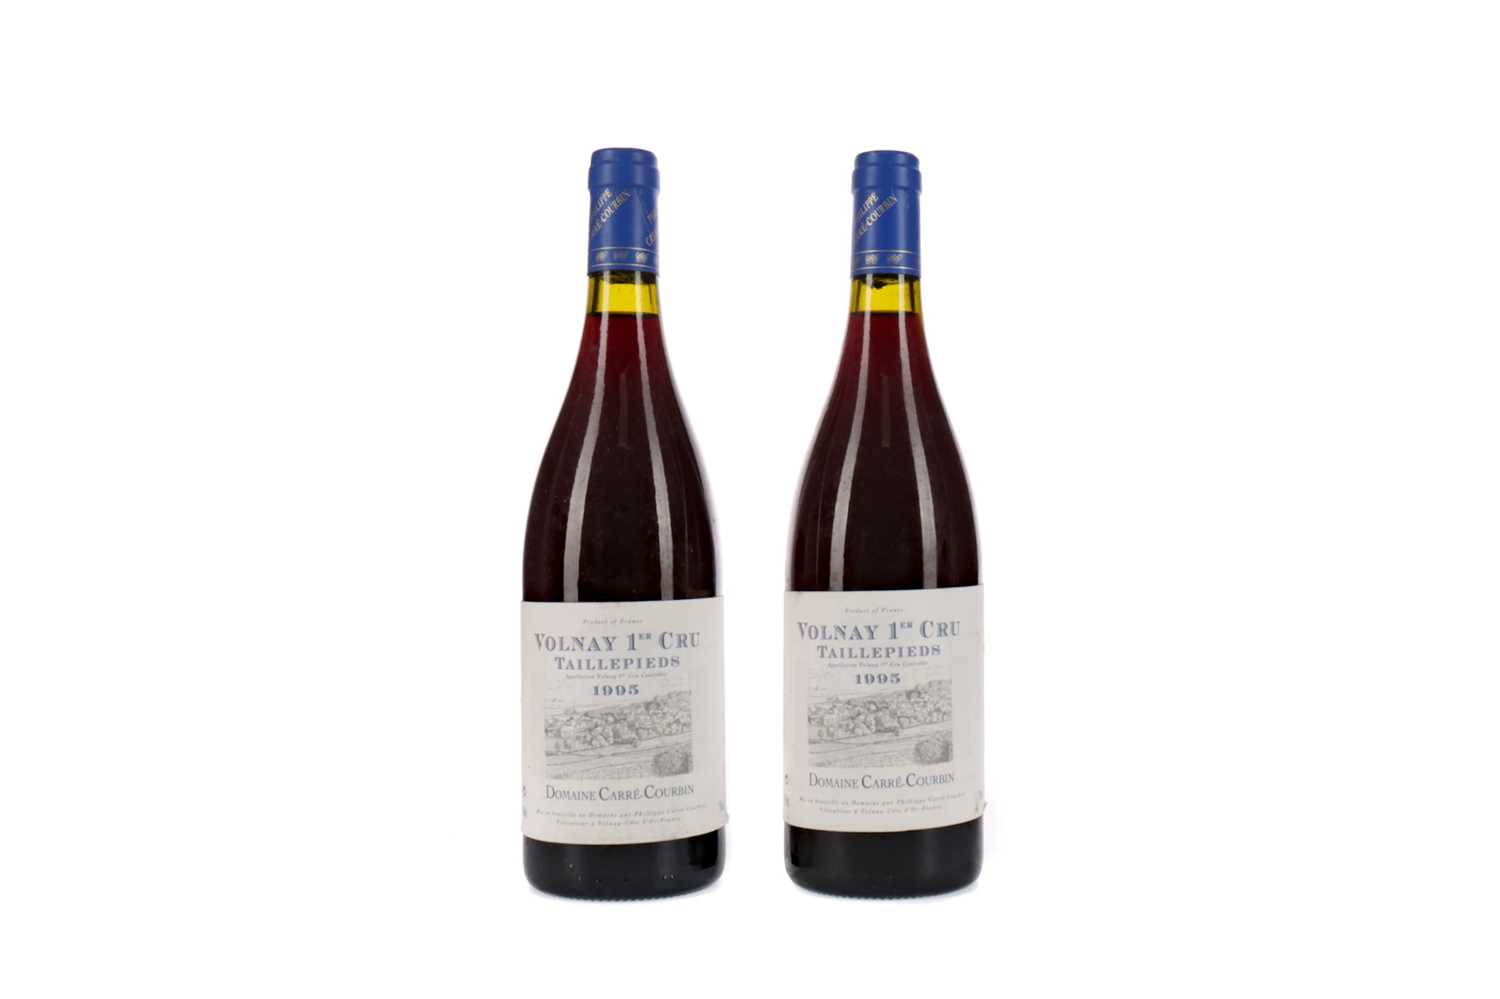 Lot 74 - TWO BOTTLES OF CARRE-COURBIN 1995 VOLNAY